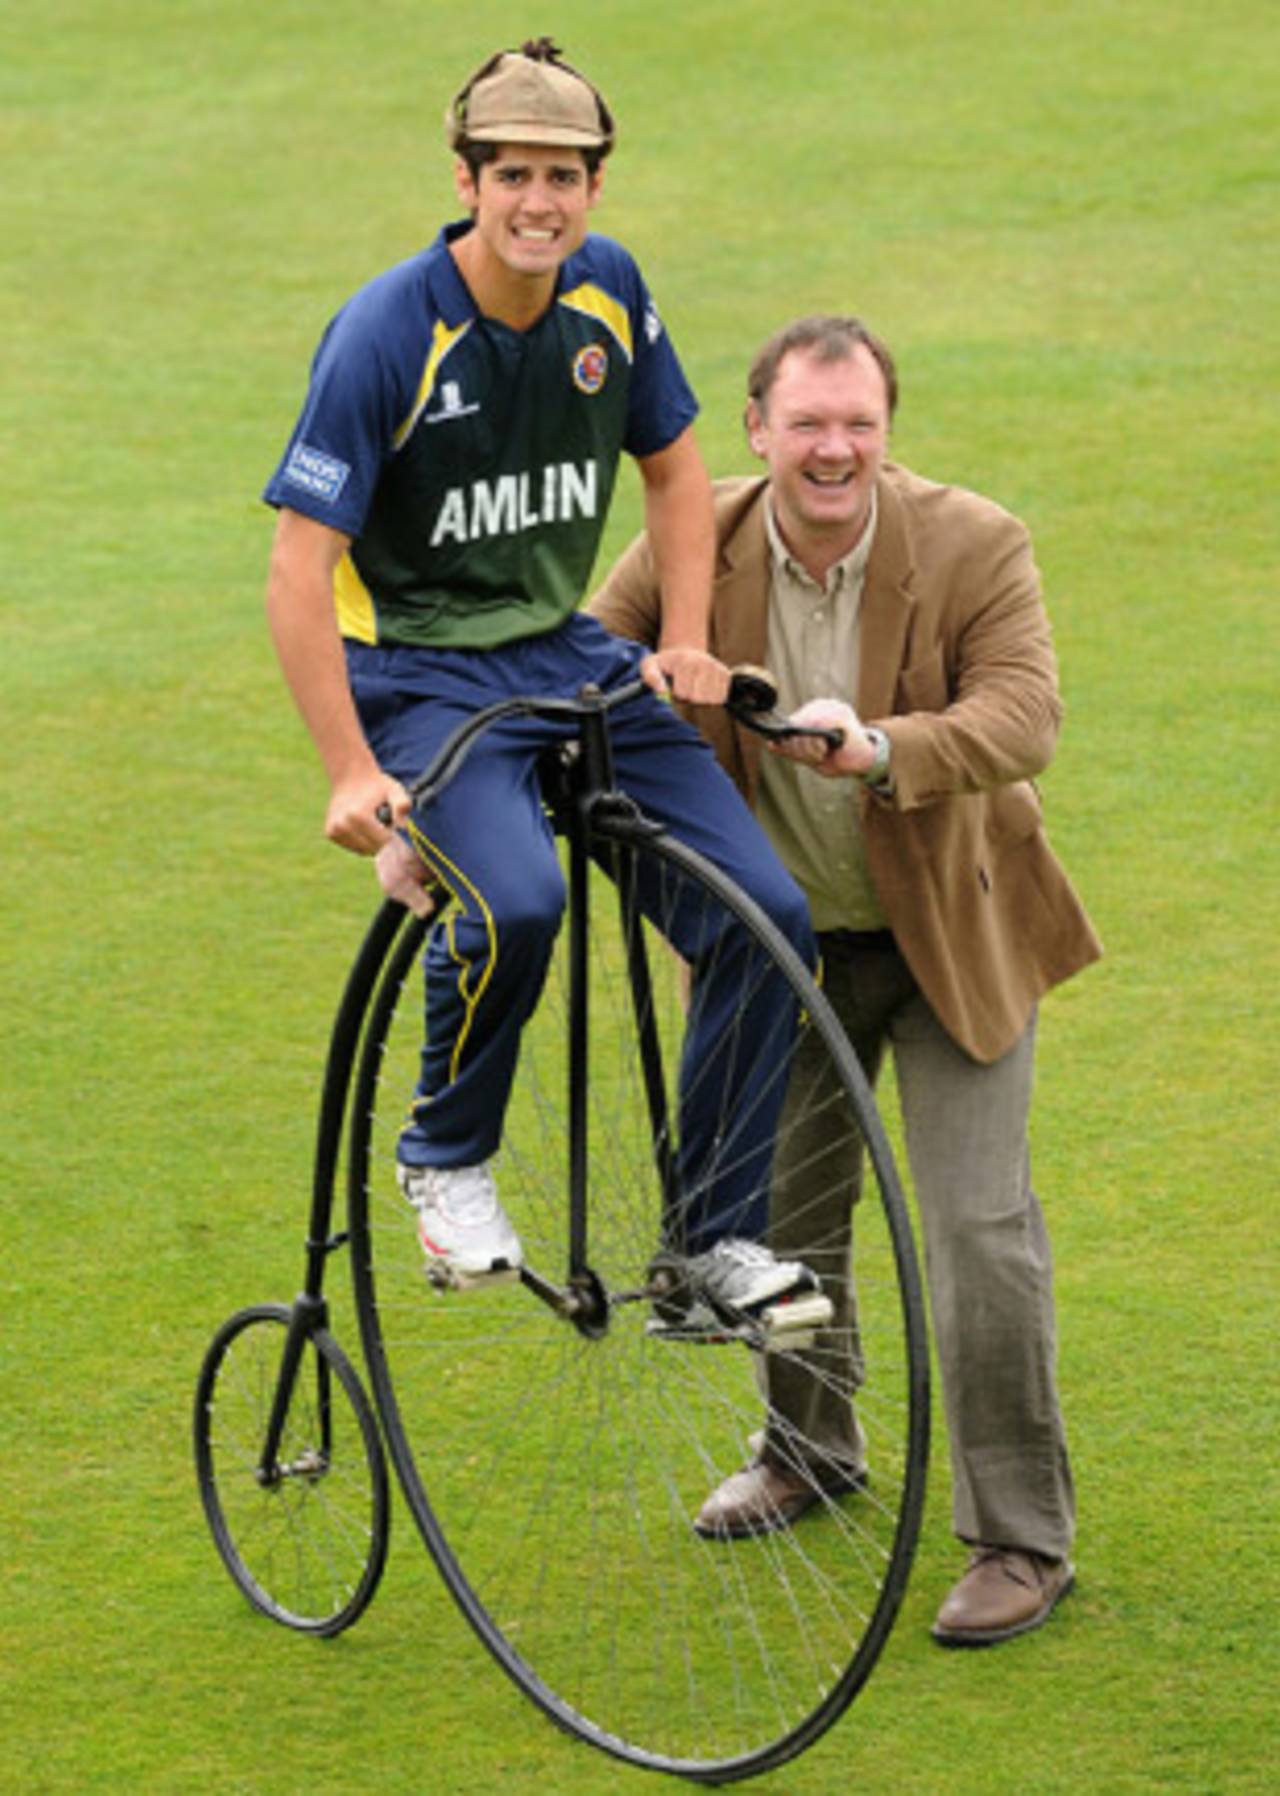 Alastair Cook poses rather unstably on a penny farthing bicycle with charity fundraiser Lloyd Scot, Chelmsford, April 7, 2010